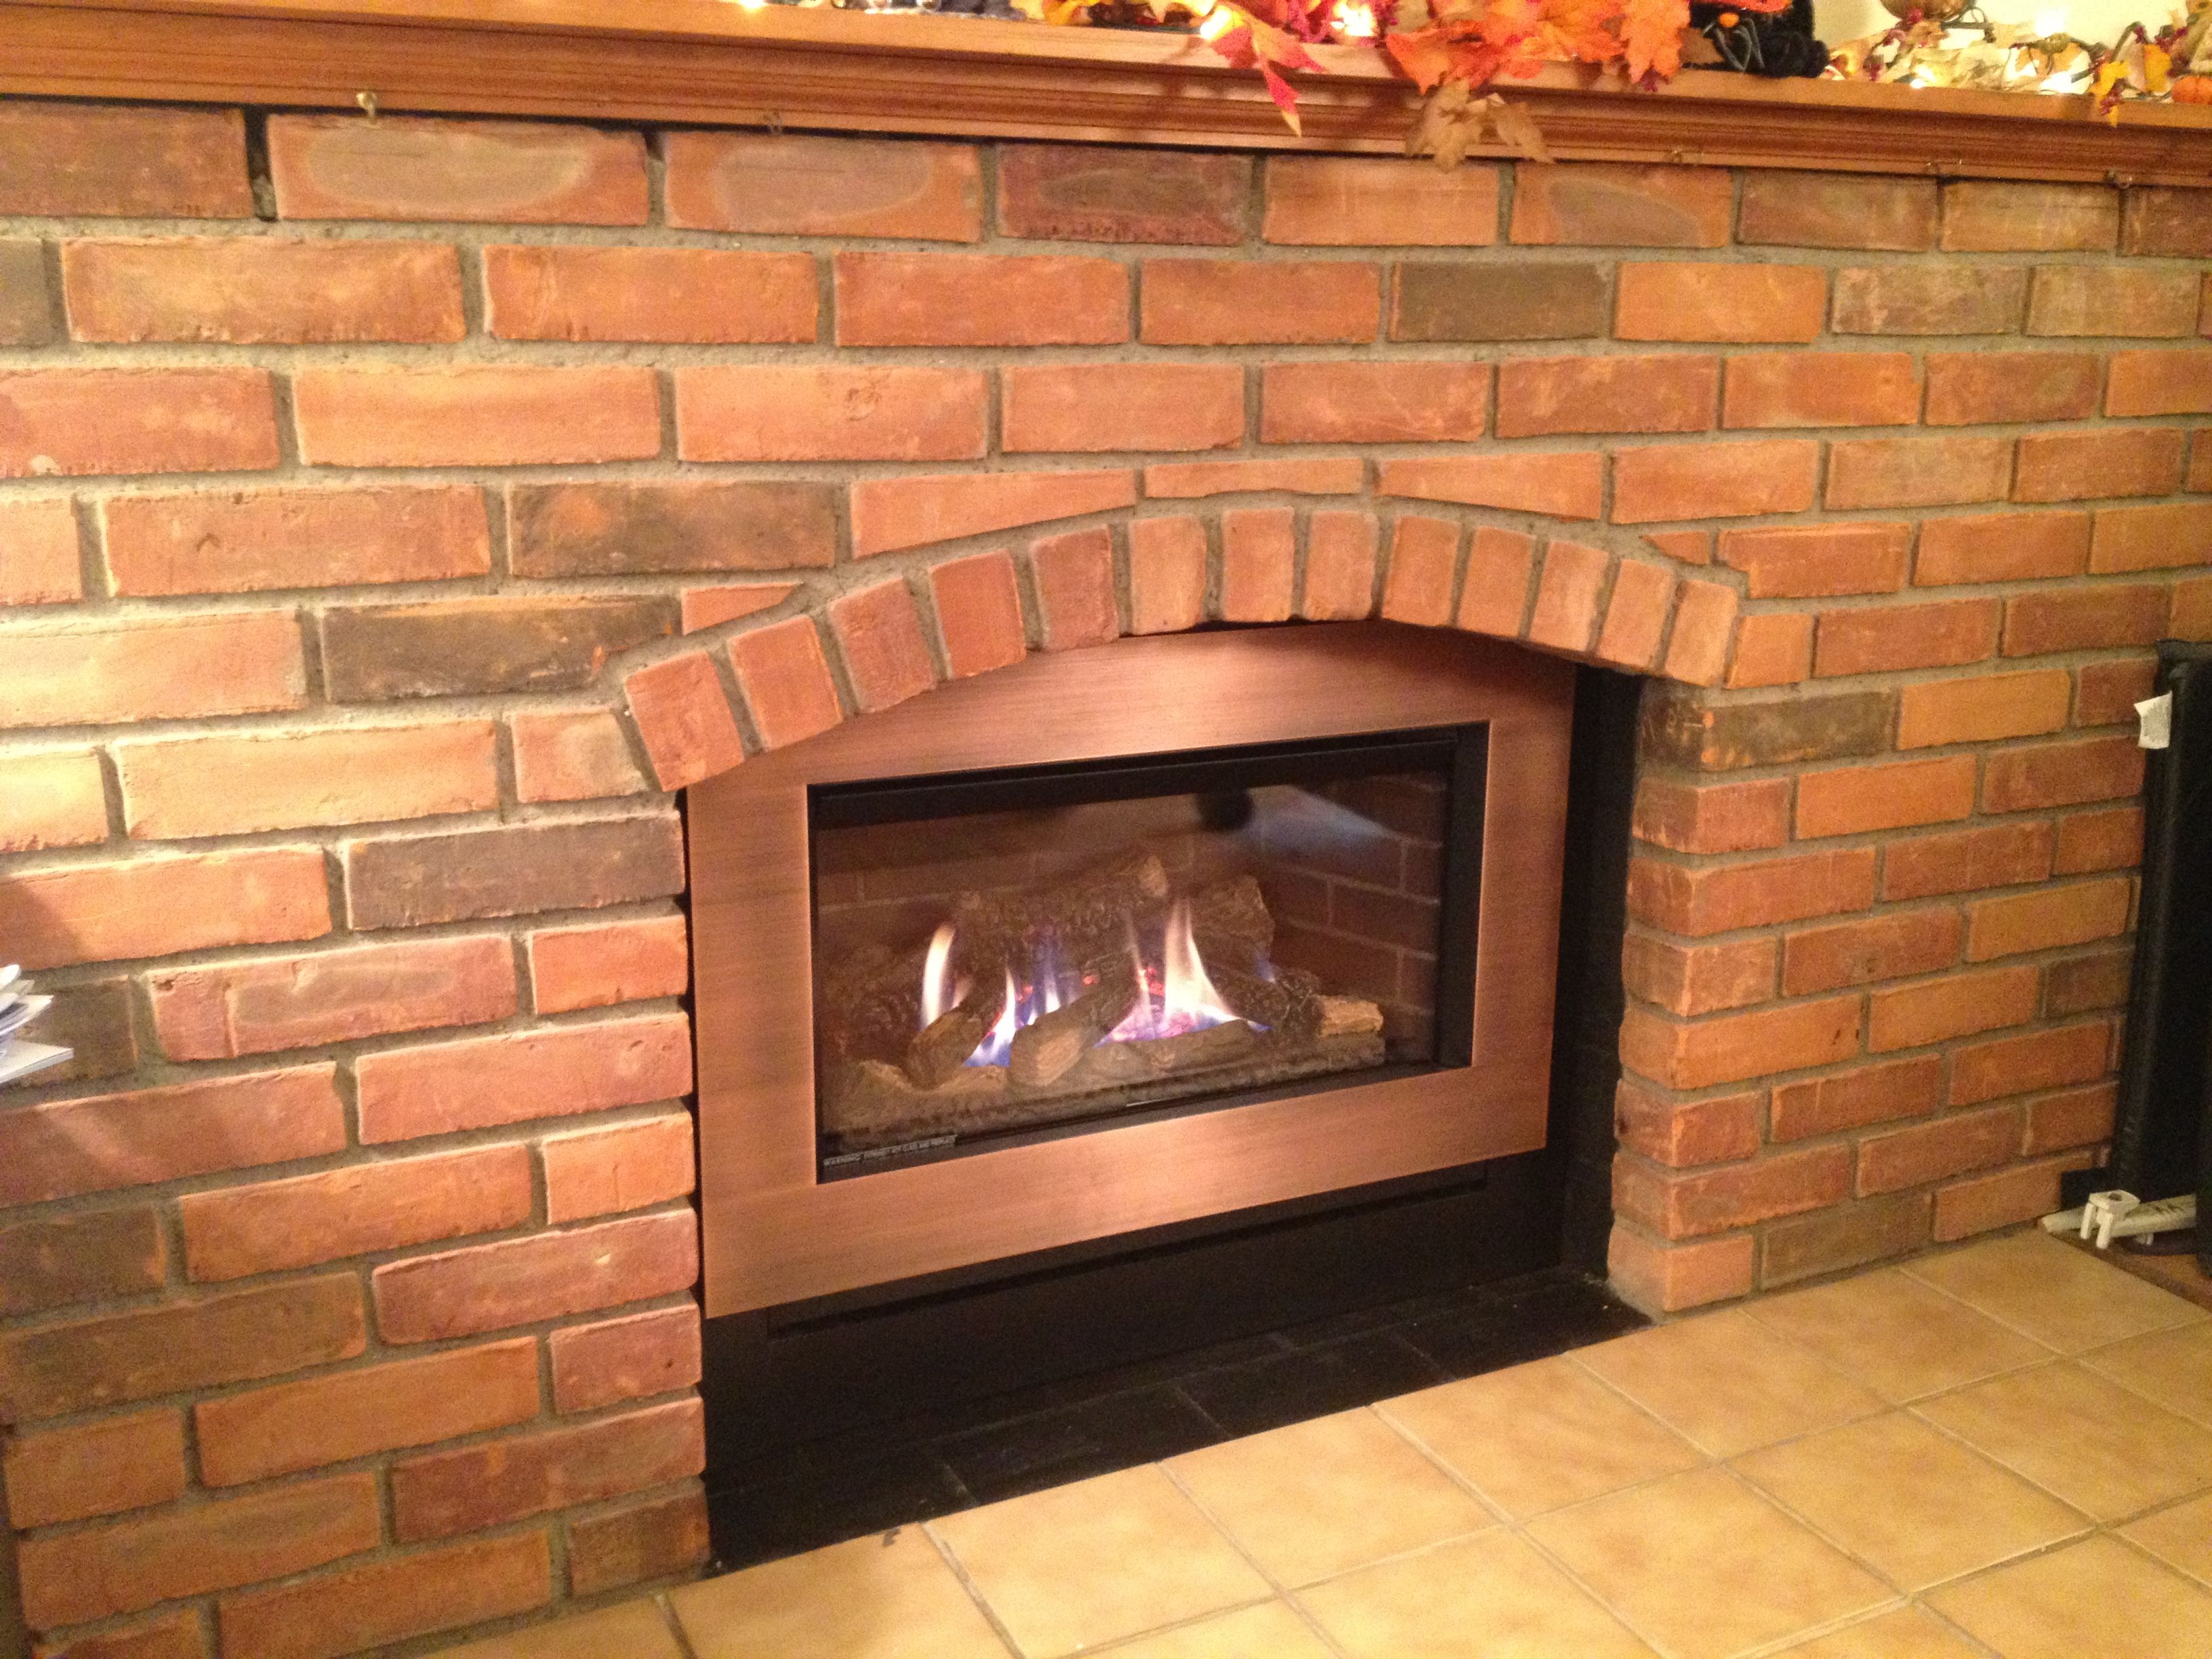 Brick Fireplace Hearth Beautiful Pin On Valor Radiant Gas Fireplaces Midwest Dealer